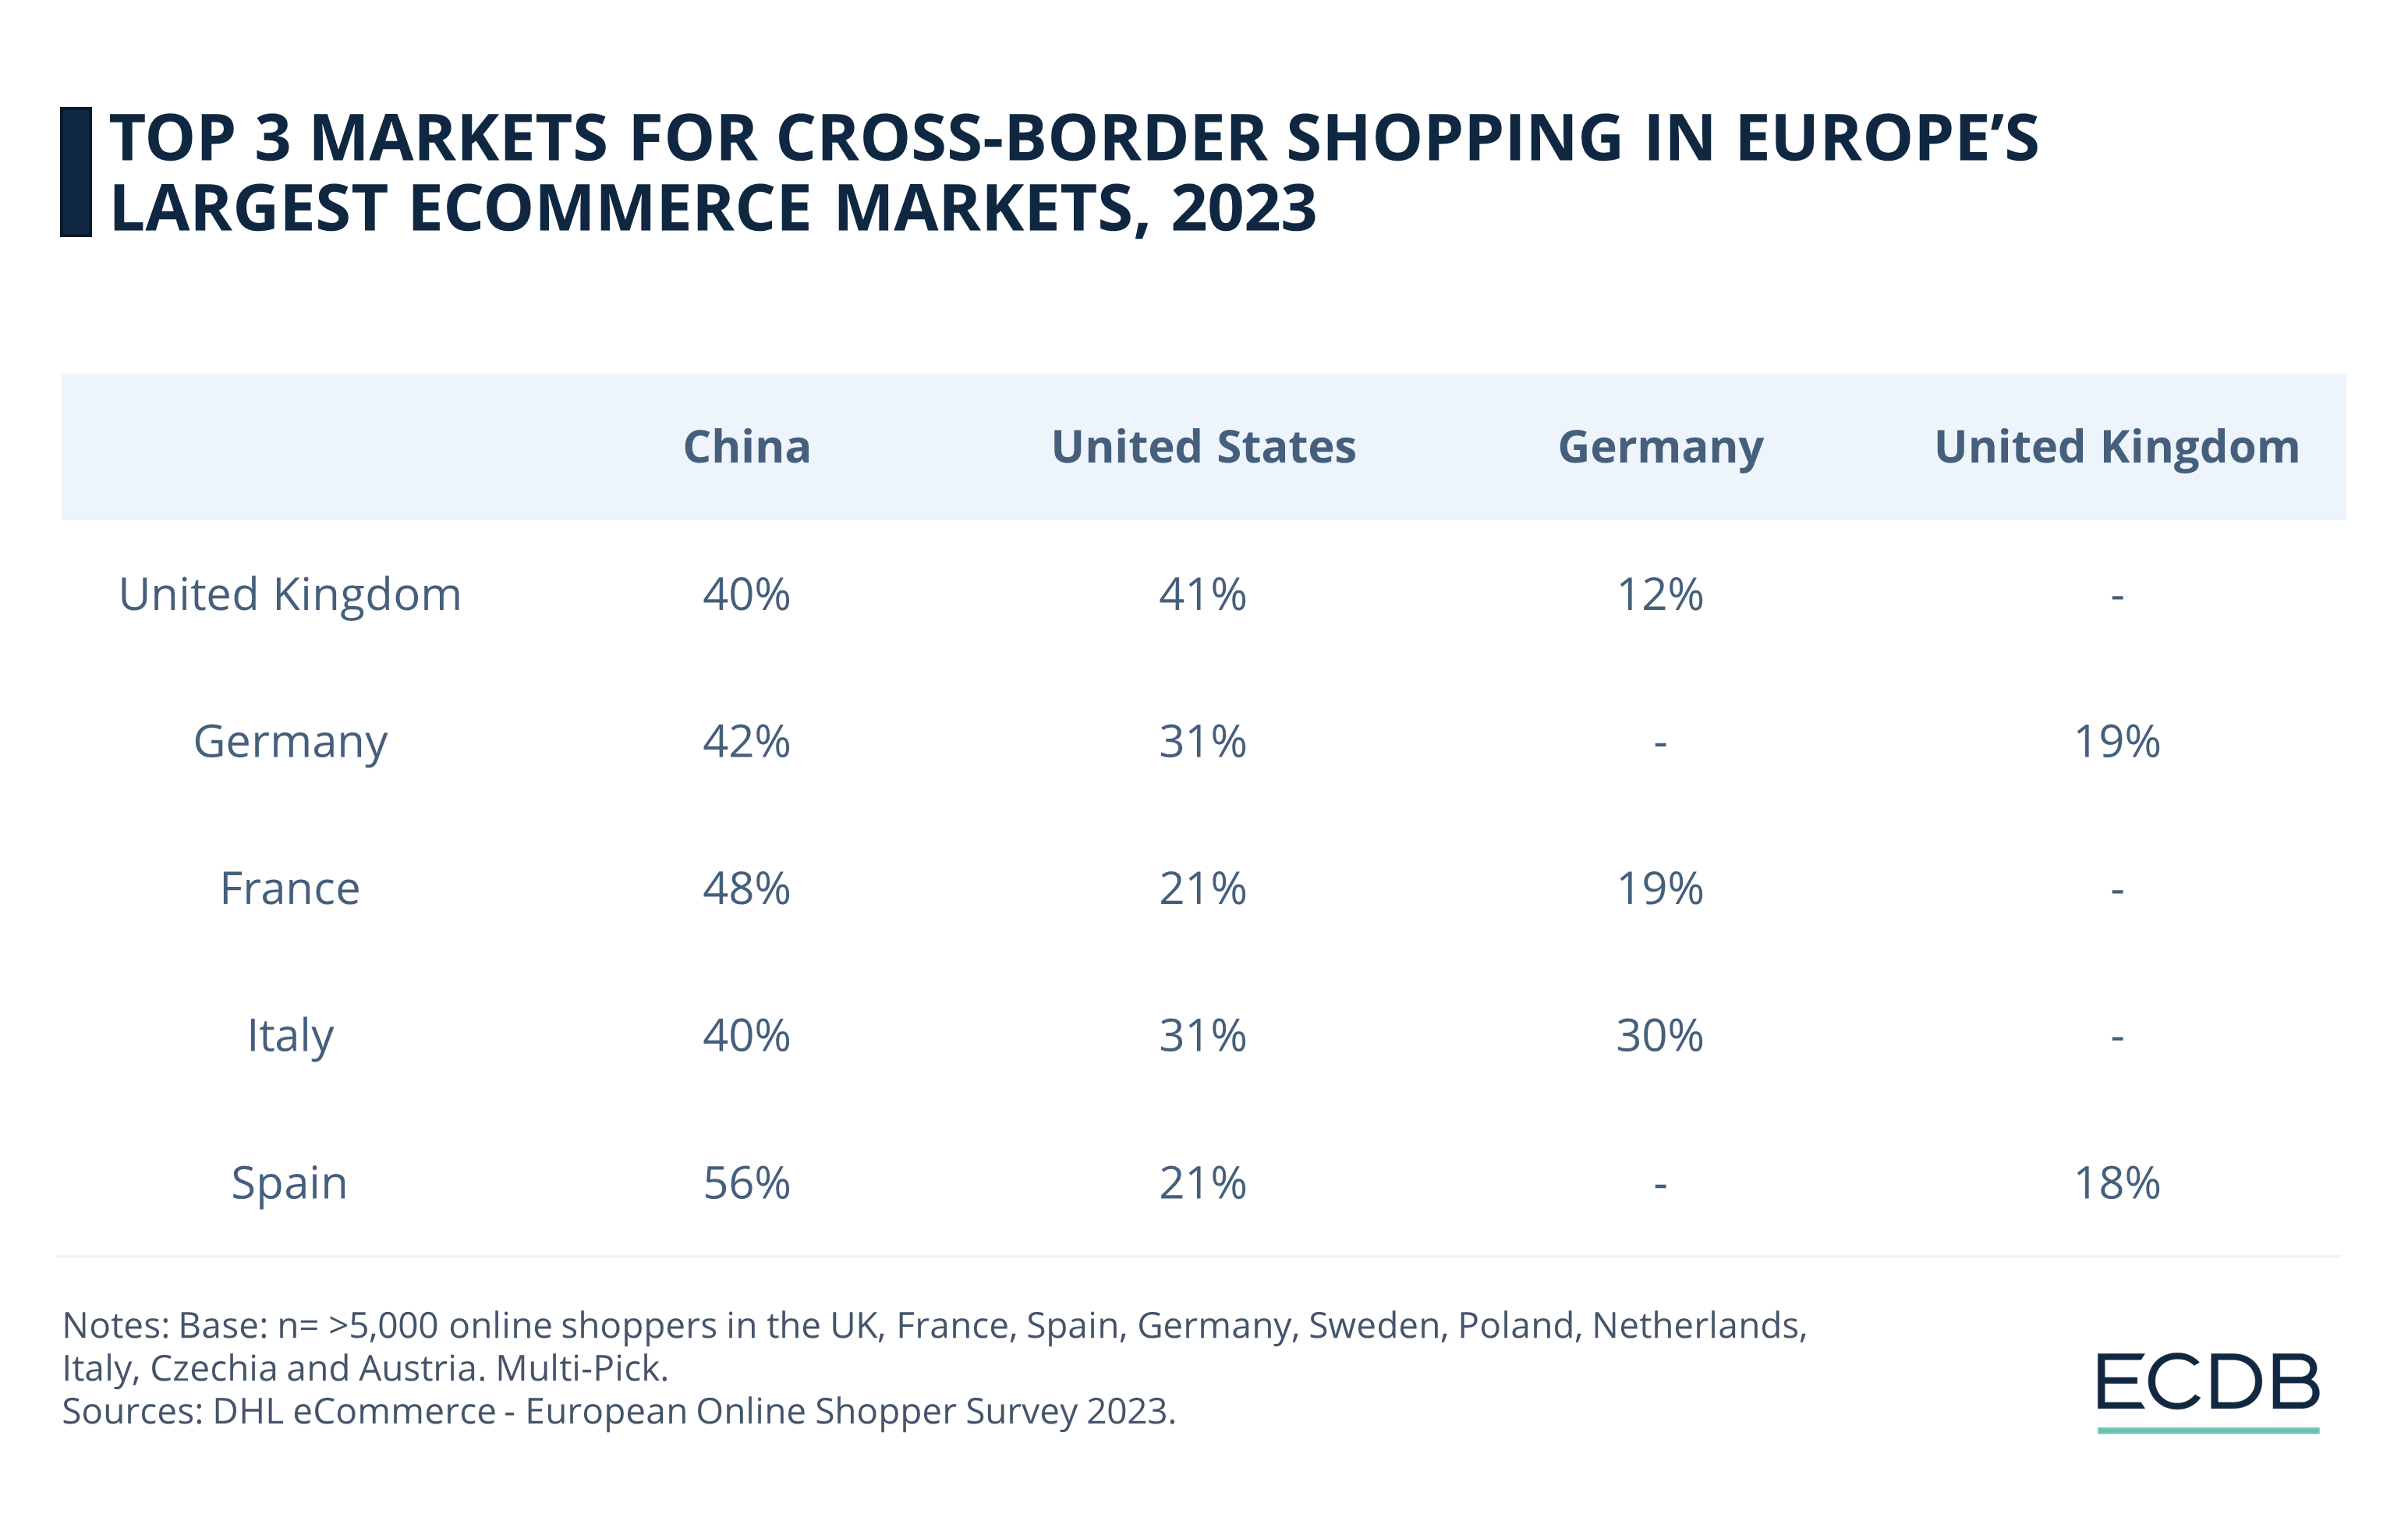 Top 3 Markets for Cross-Border Shopping in Europe’s Largest eCommerce Markets, 2023